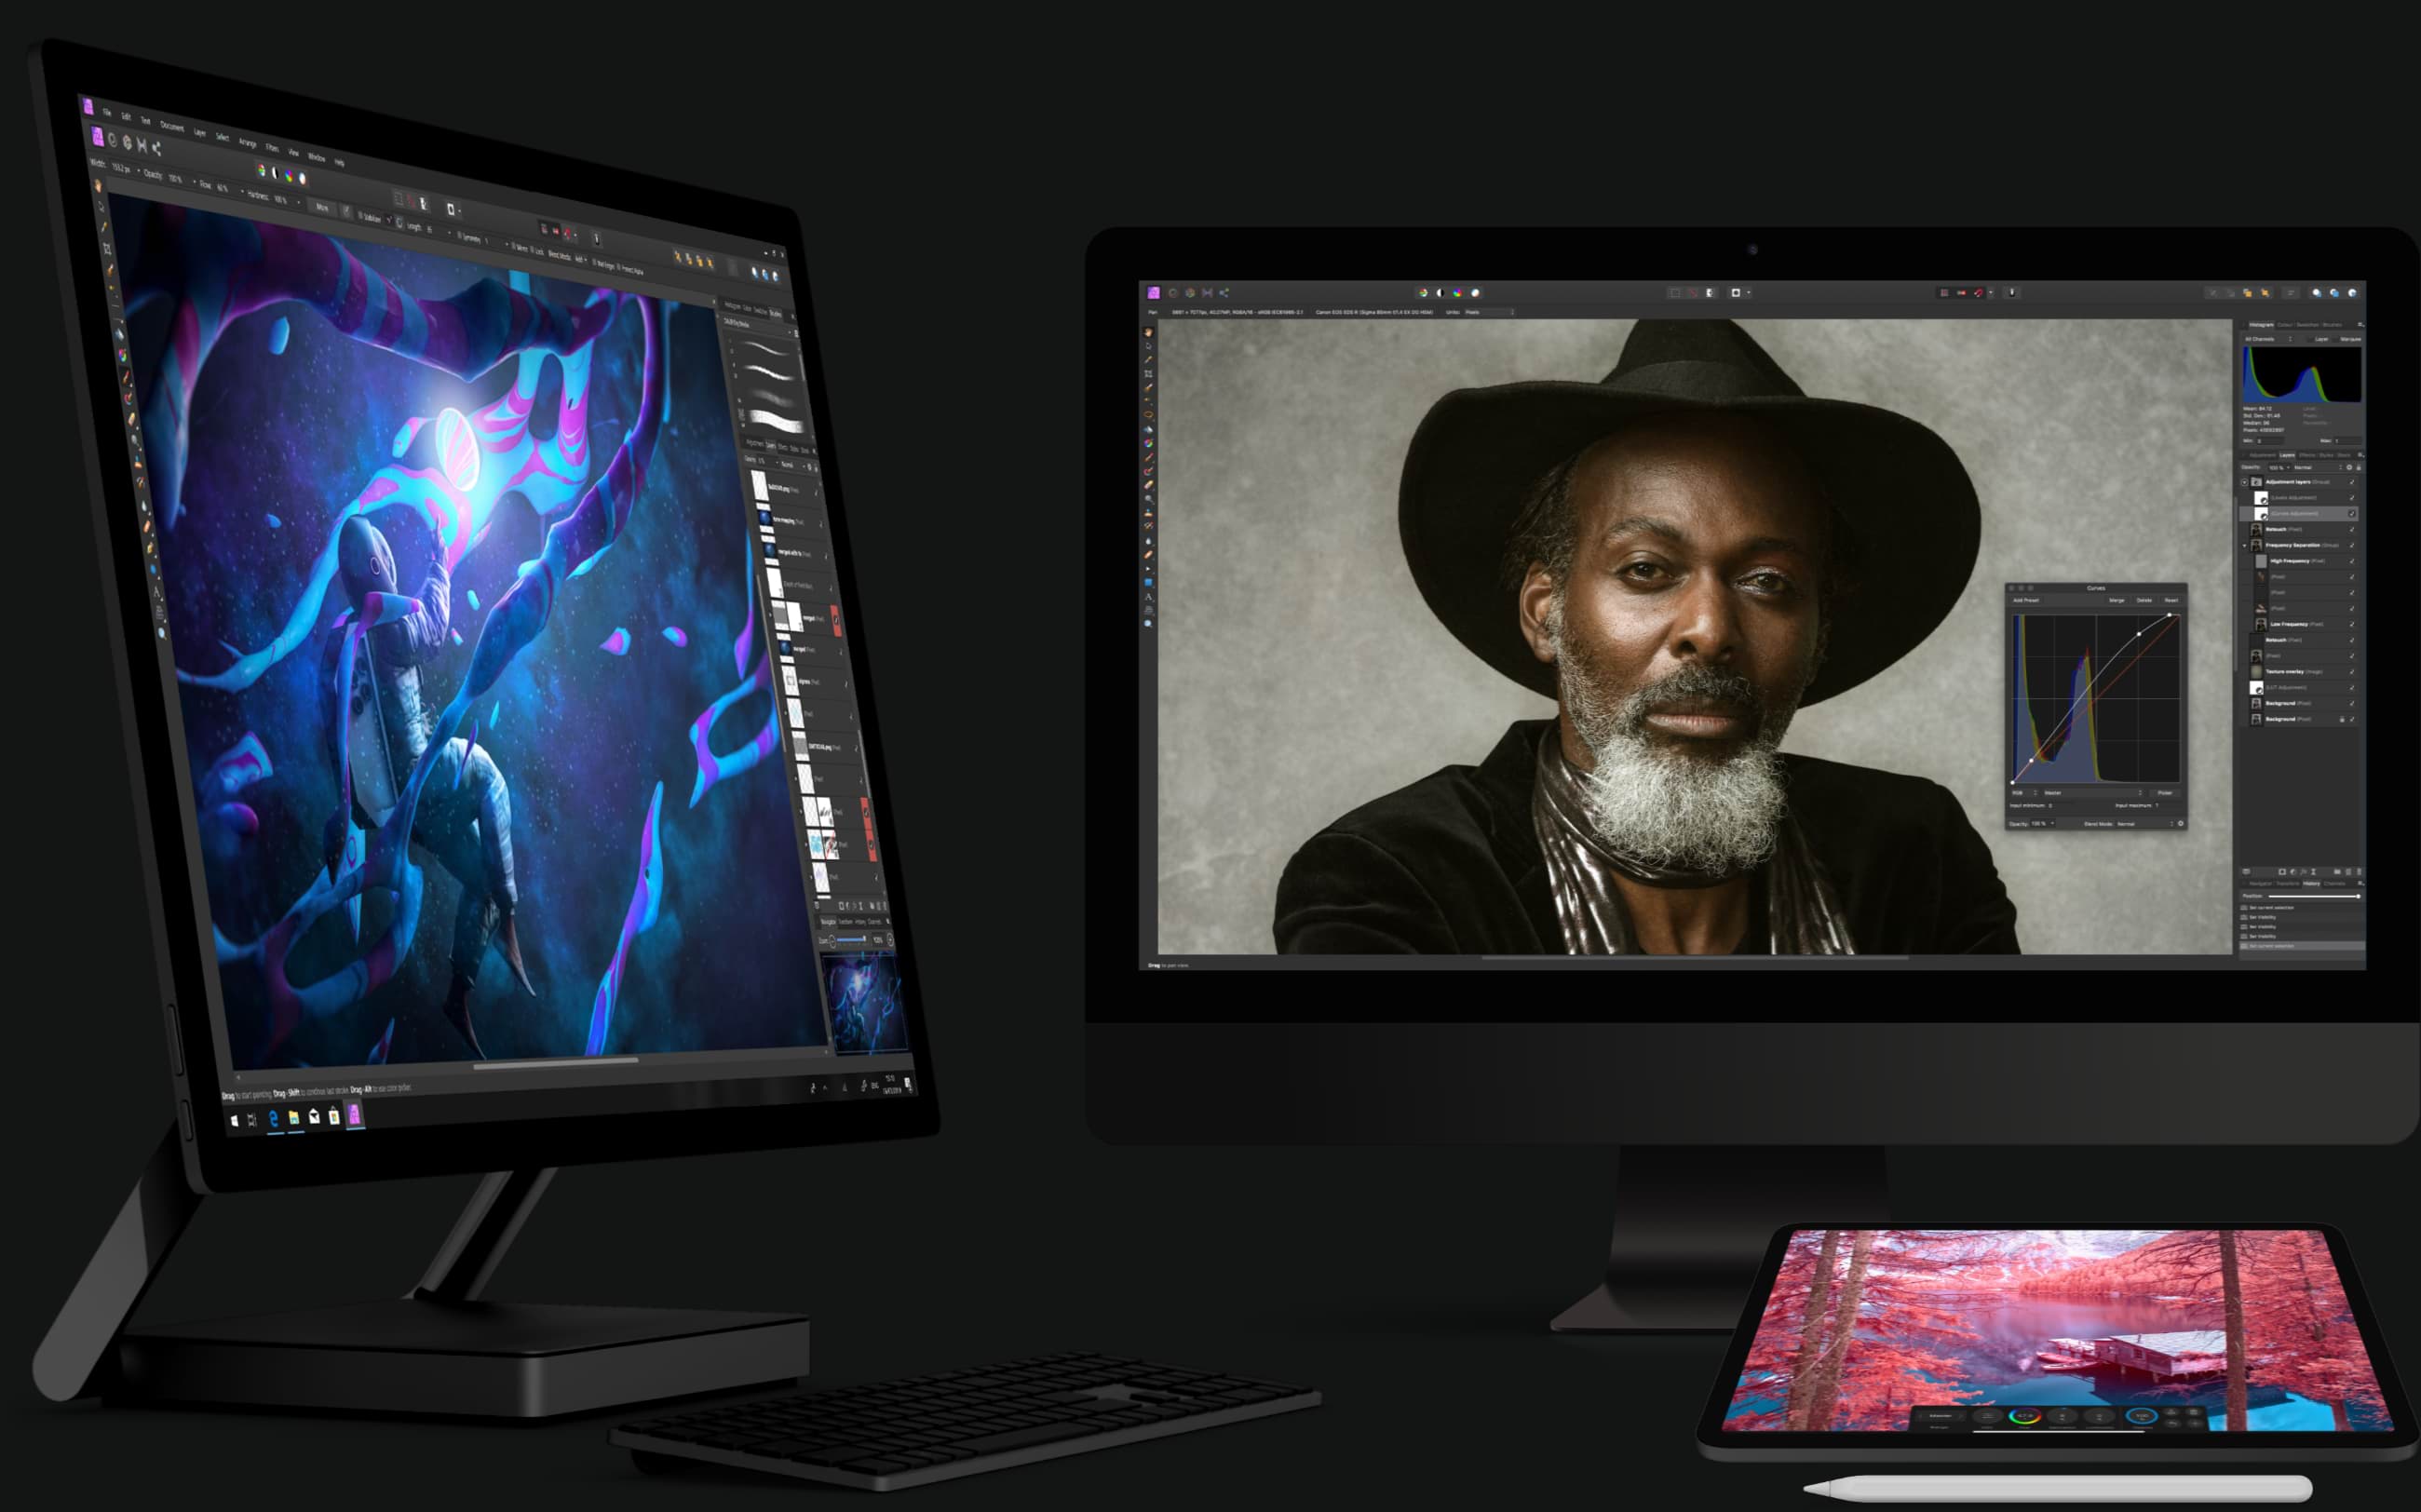 Windows PC, iMac and iPad with the Affinity Photo UI on each screen